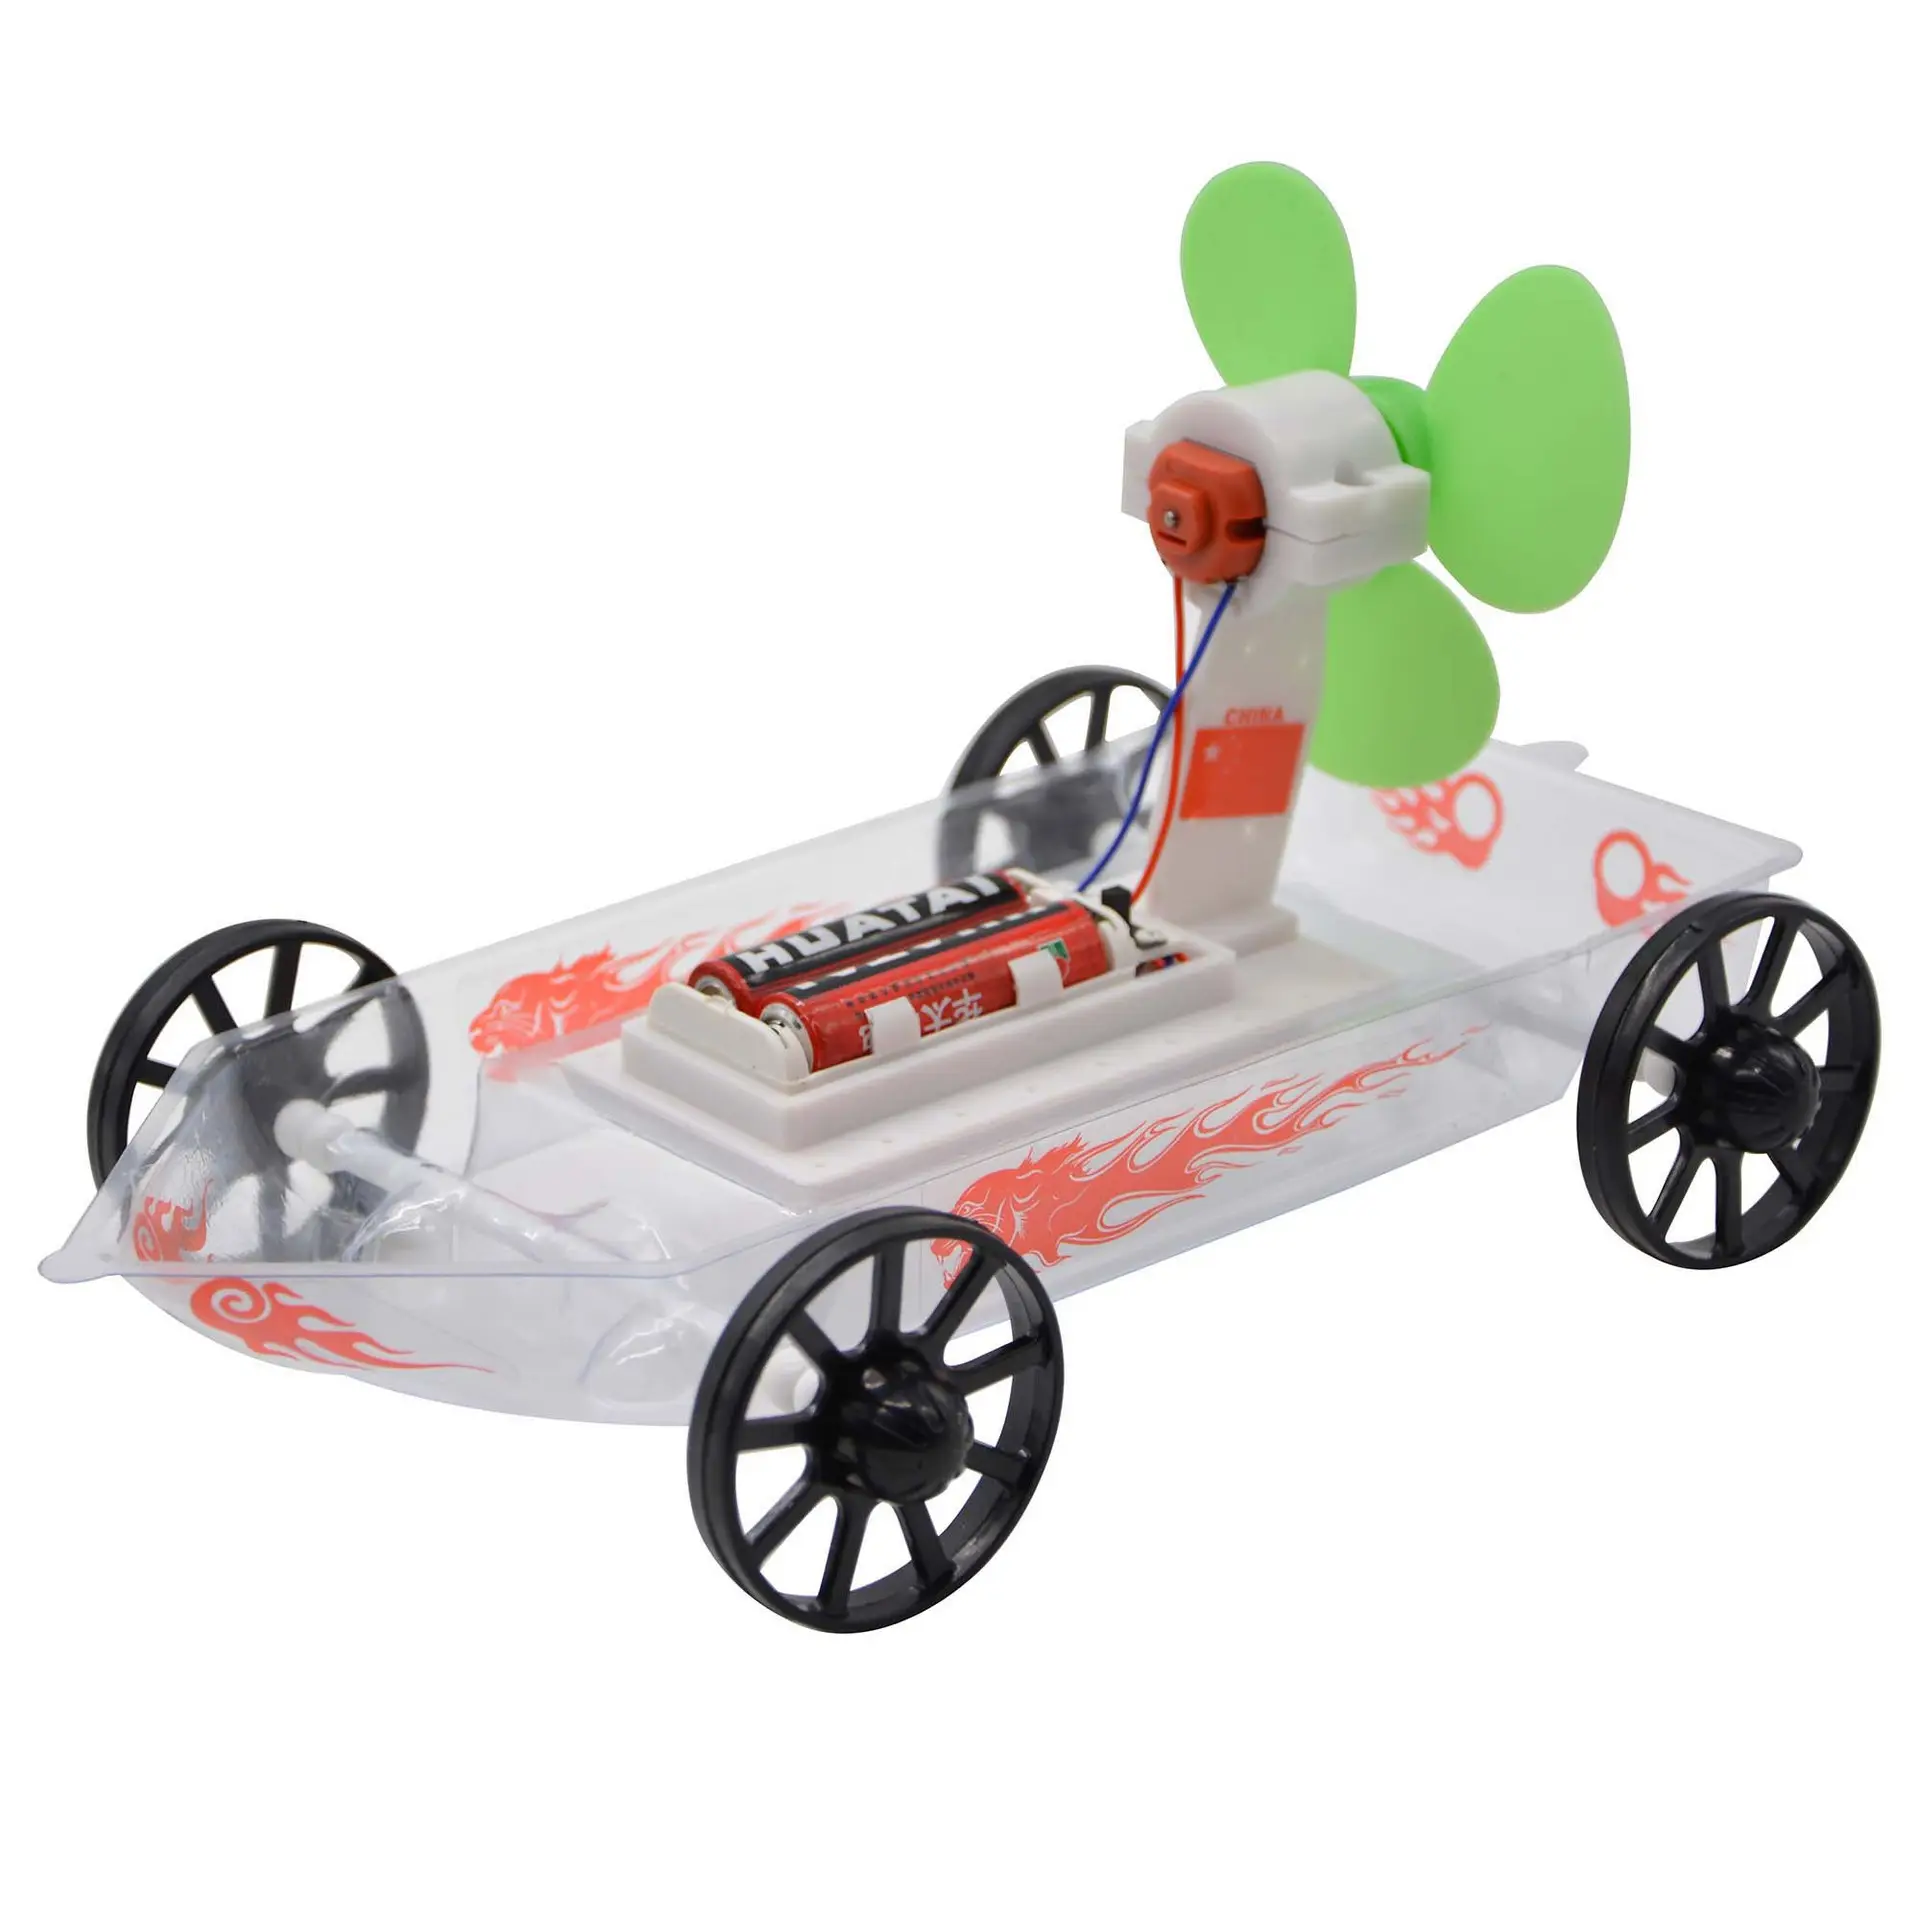 Factory DIY STEM Education Amphibious Toy Cars Air Powered Wind Energy Power Toy Car Kit Science Engineering Toys Experiment Kit